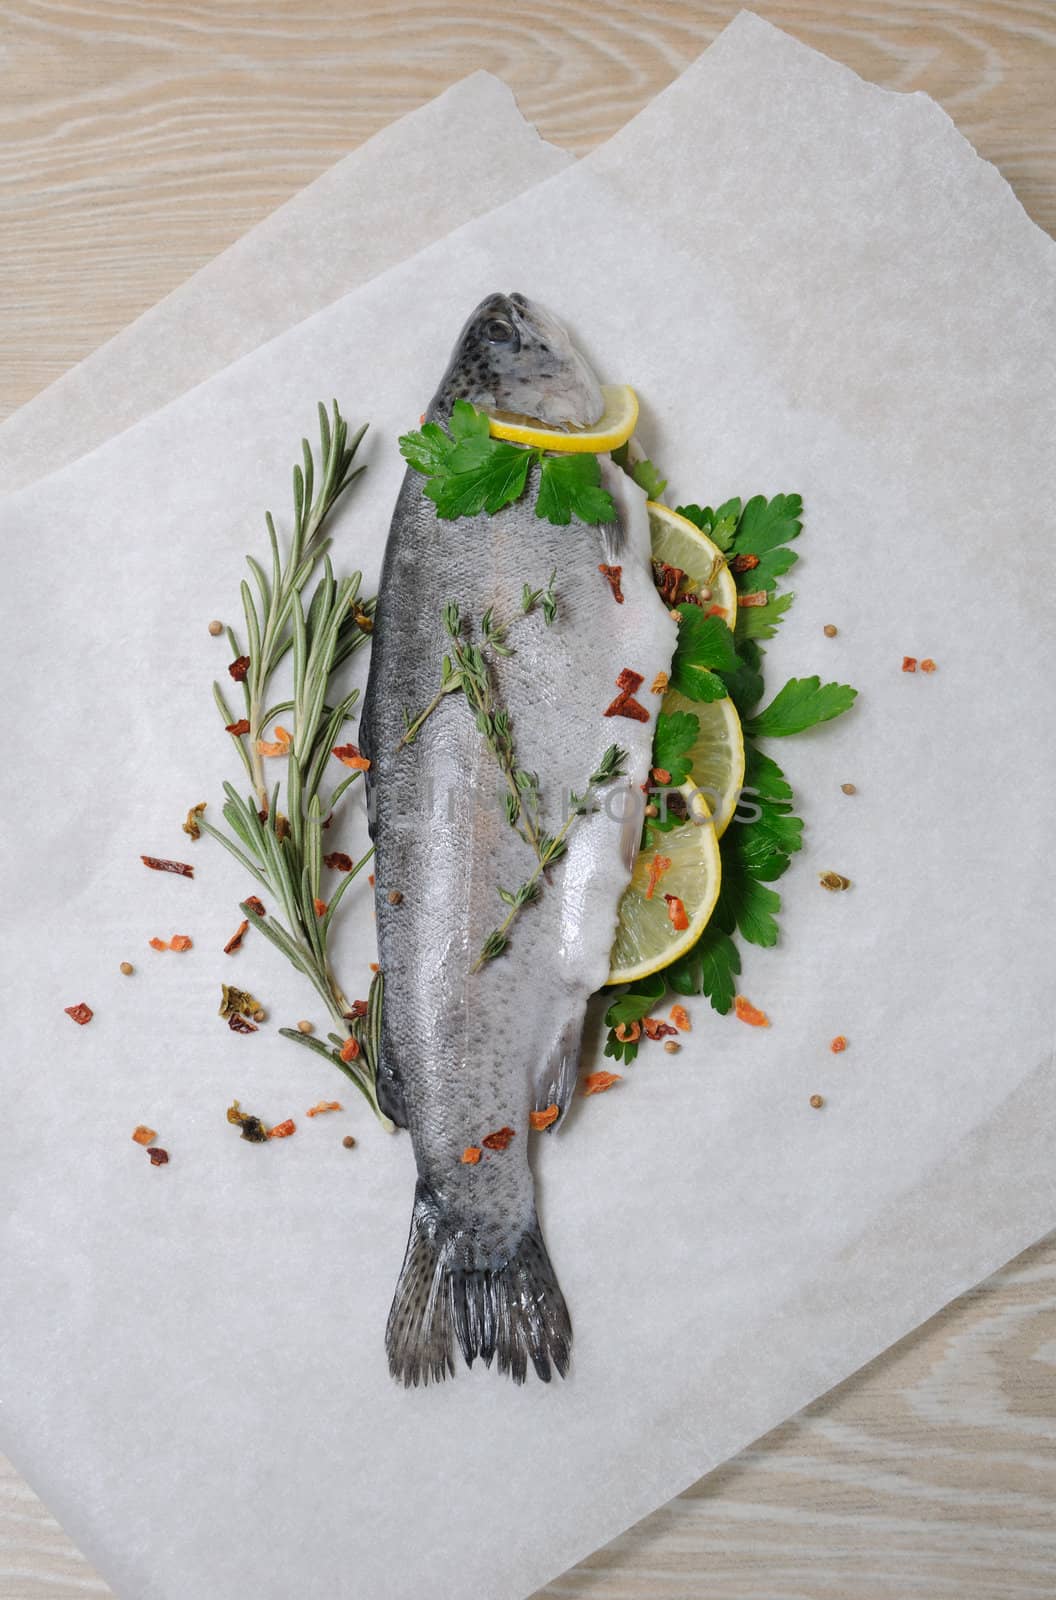 Fresh trout with lemon and spices by Apolonia